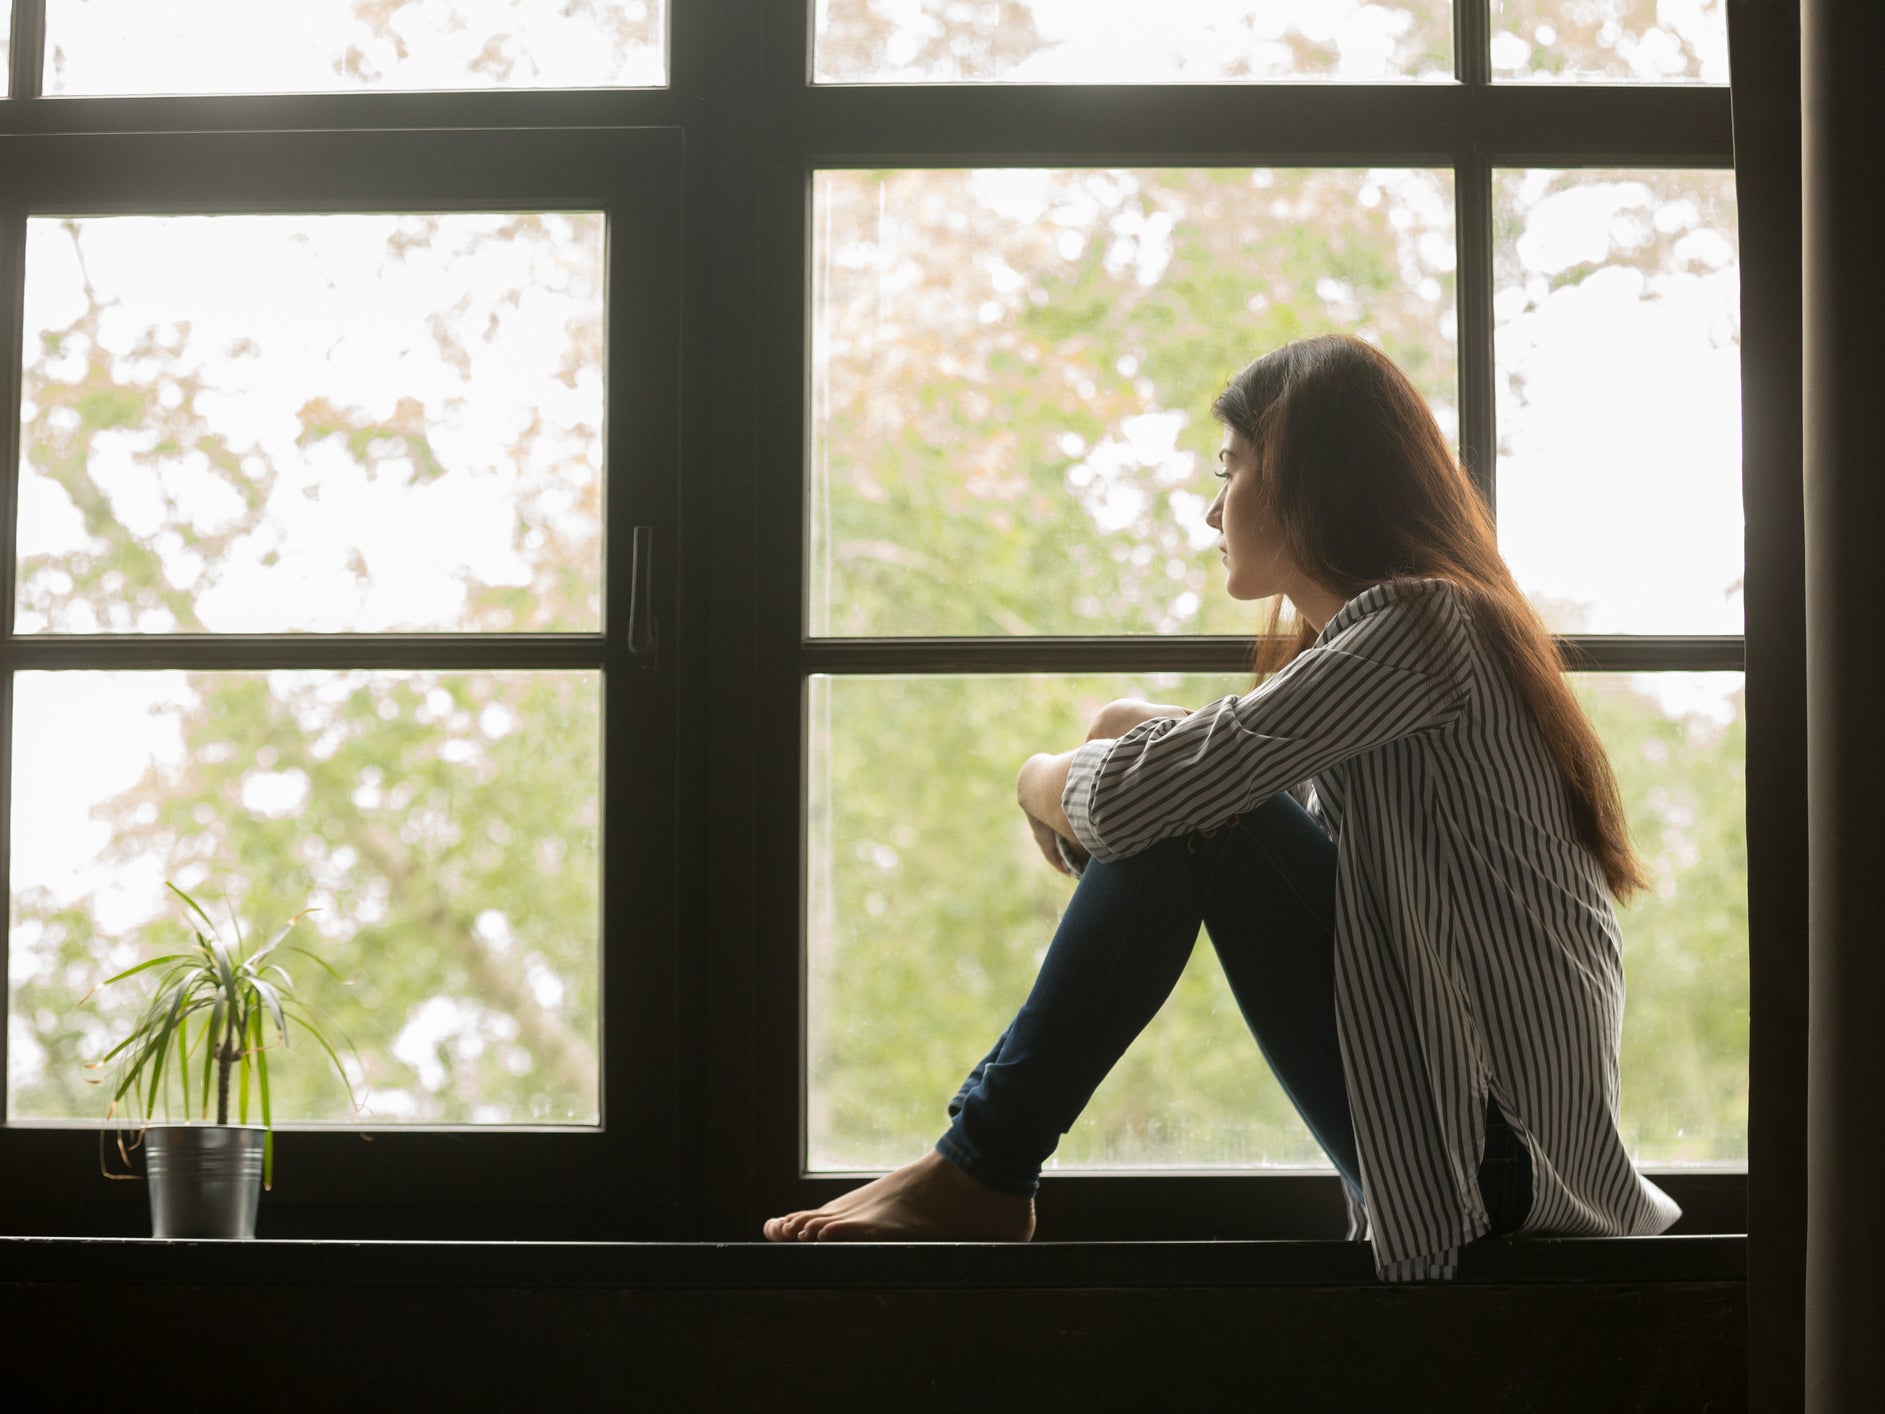 Loneliness should be viewed as a 'legitimate health risk in serious illness', researchers say